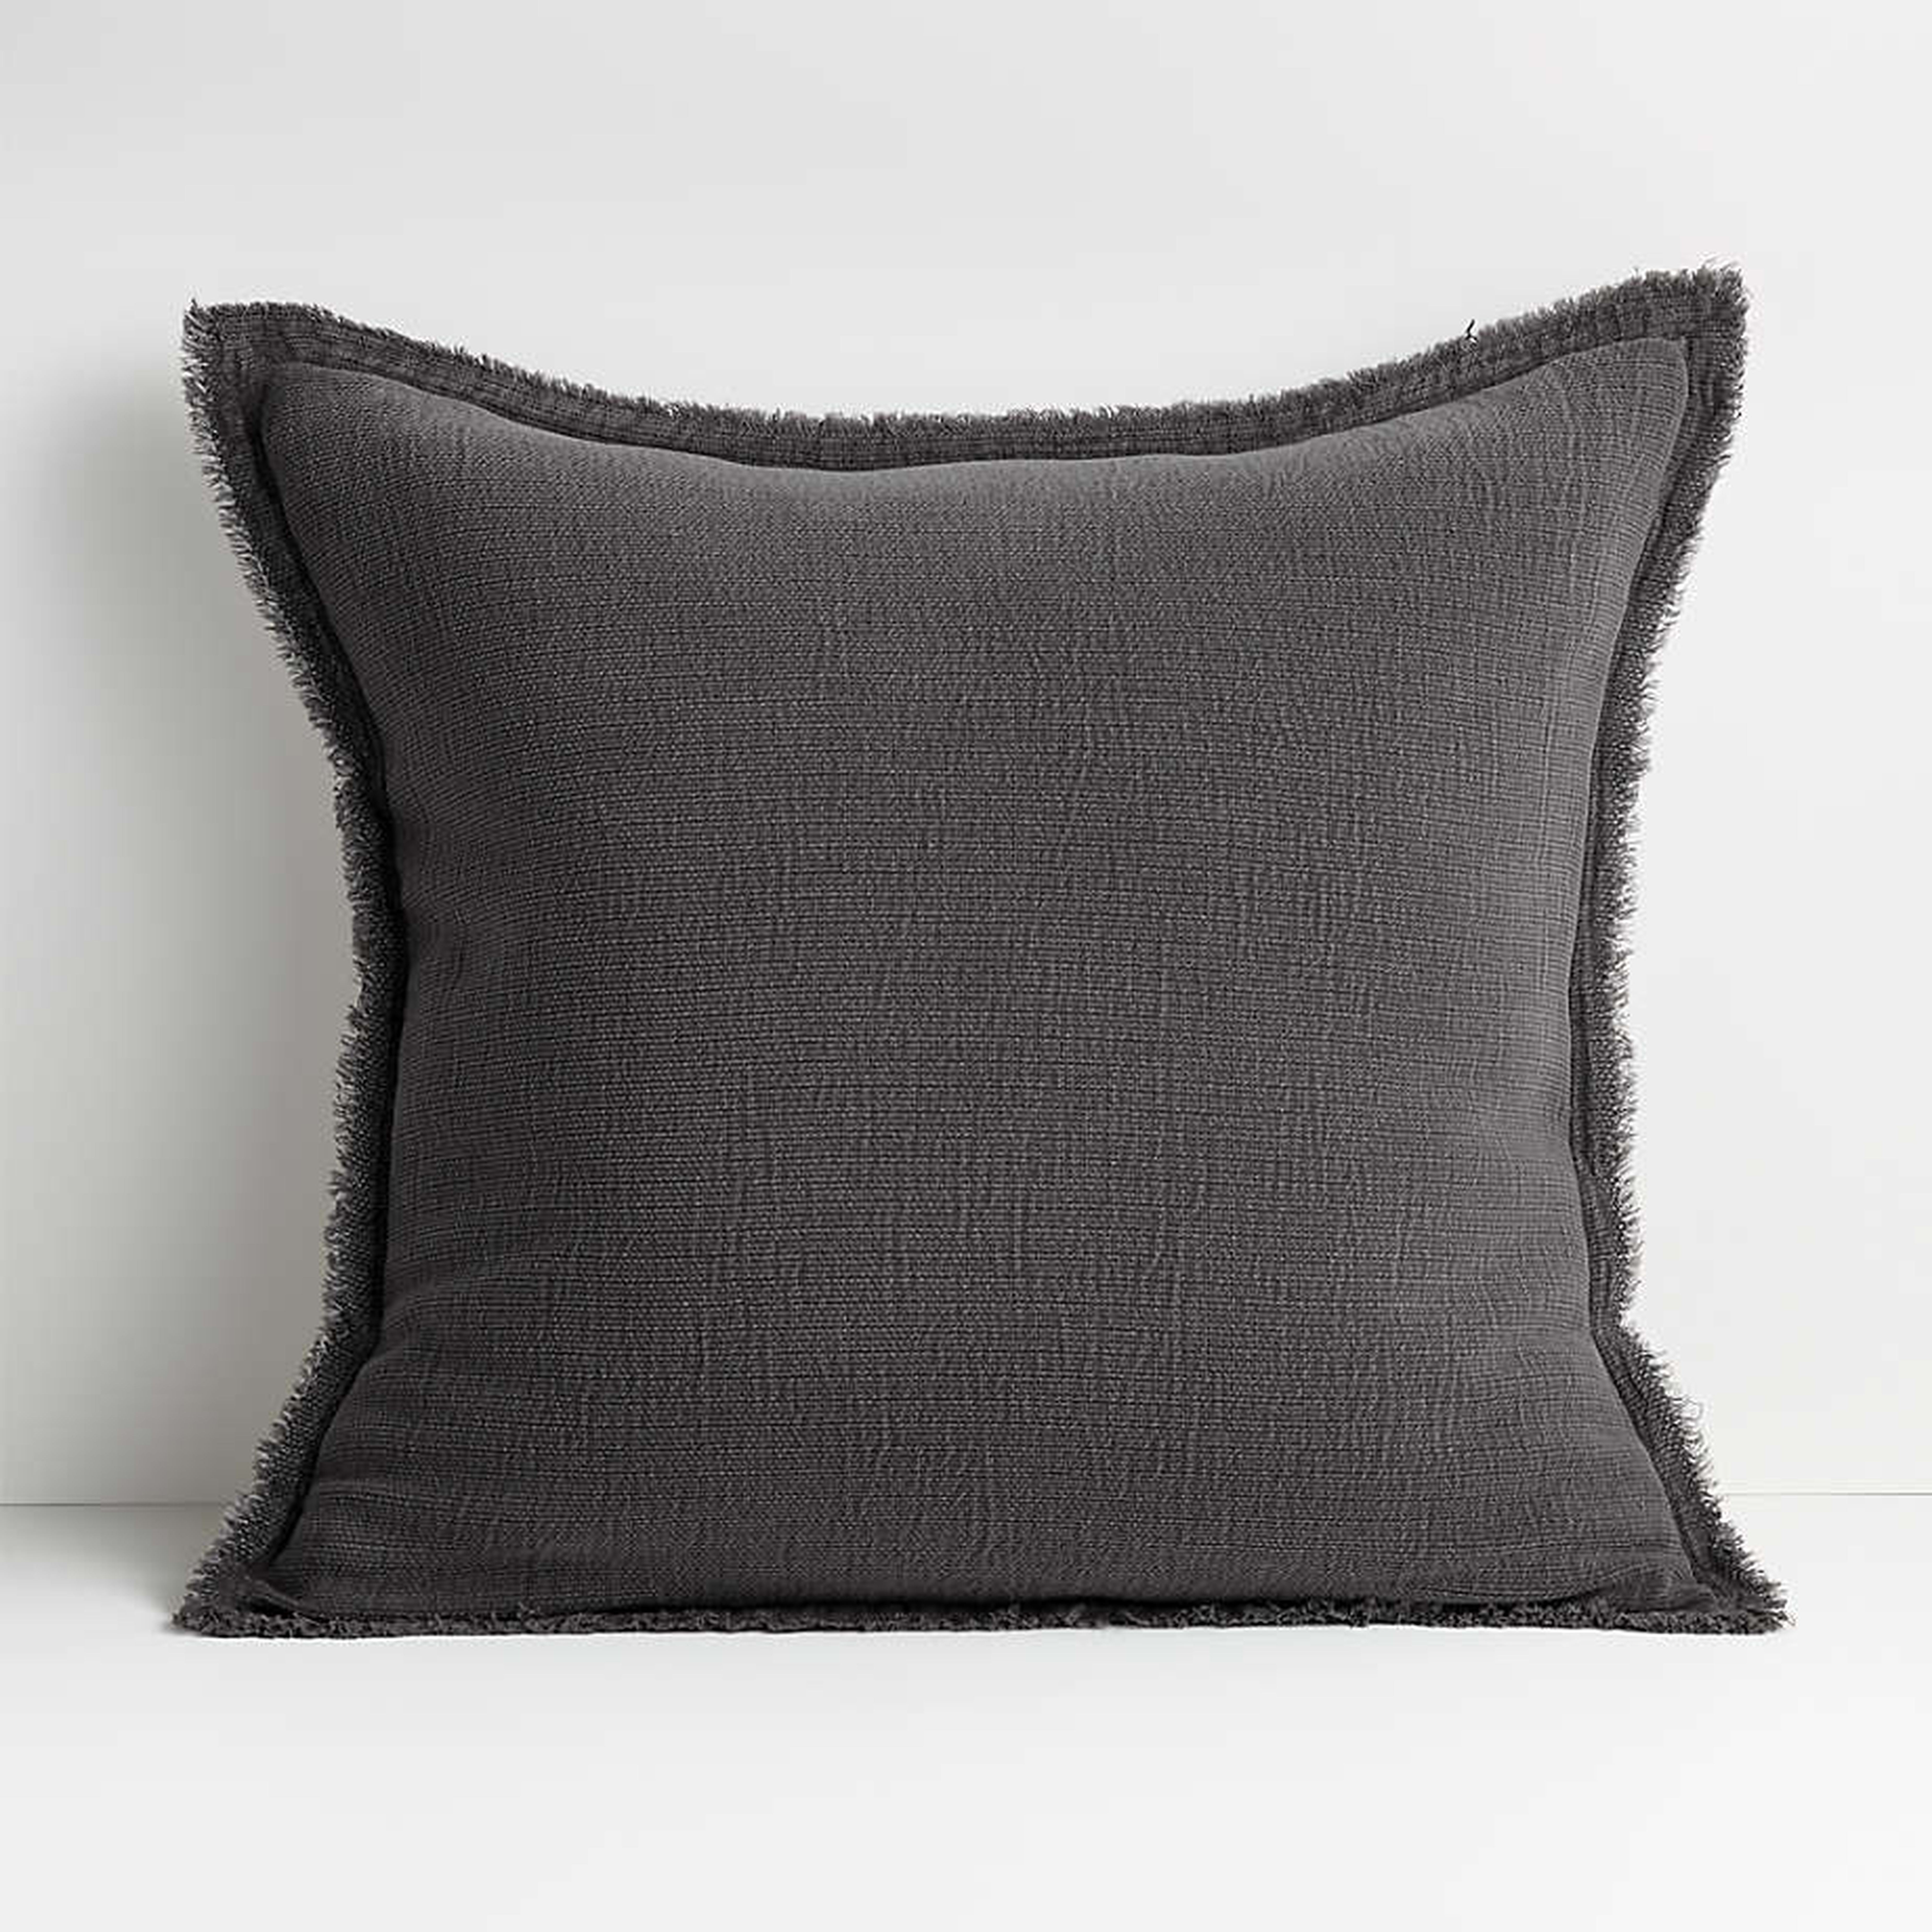 Olind Pillow with Feather-Down Insert, Gray, 23" x 23" - Crate and Barrel